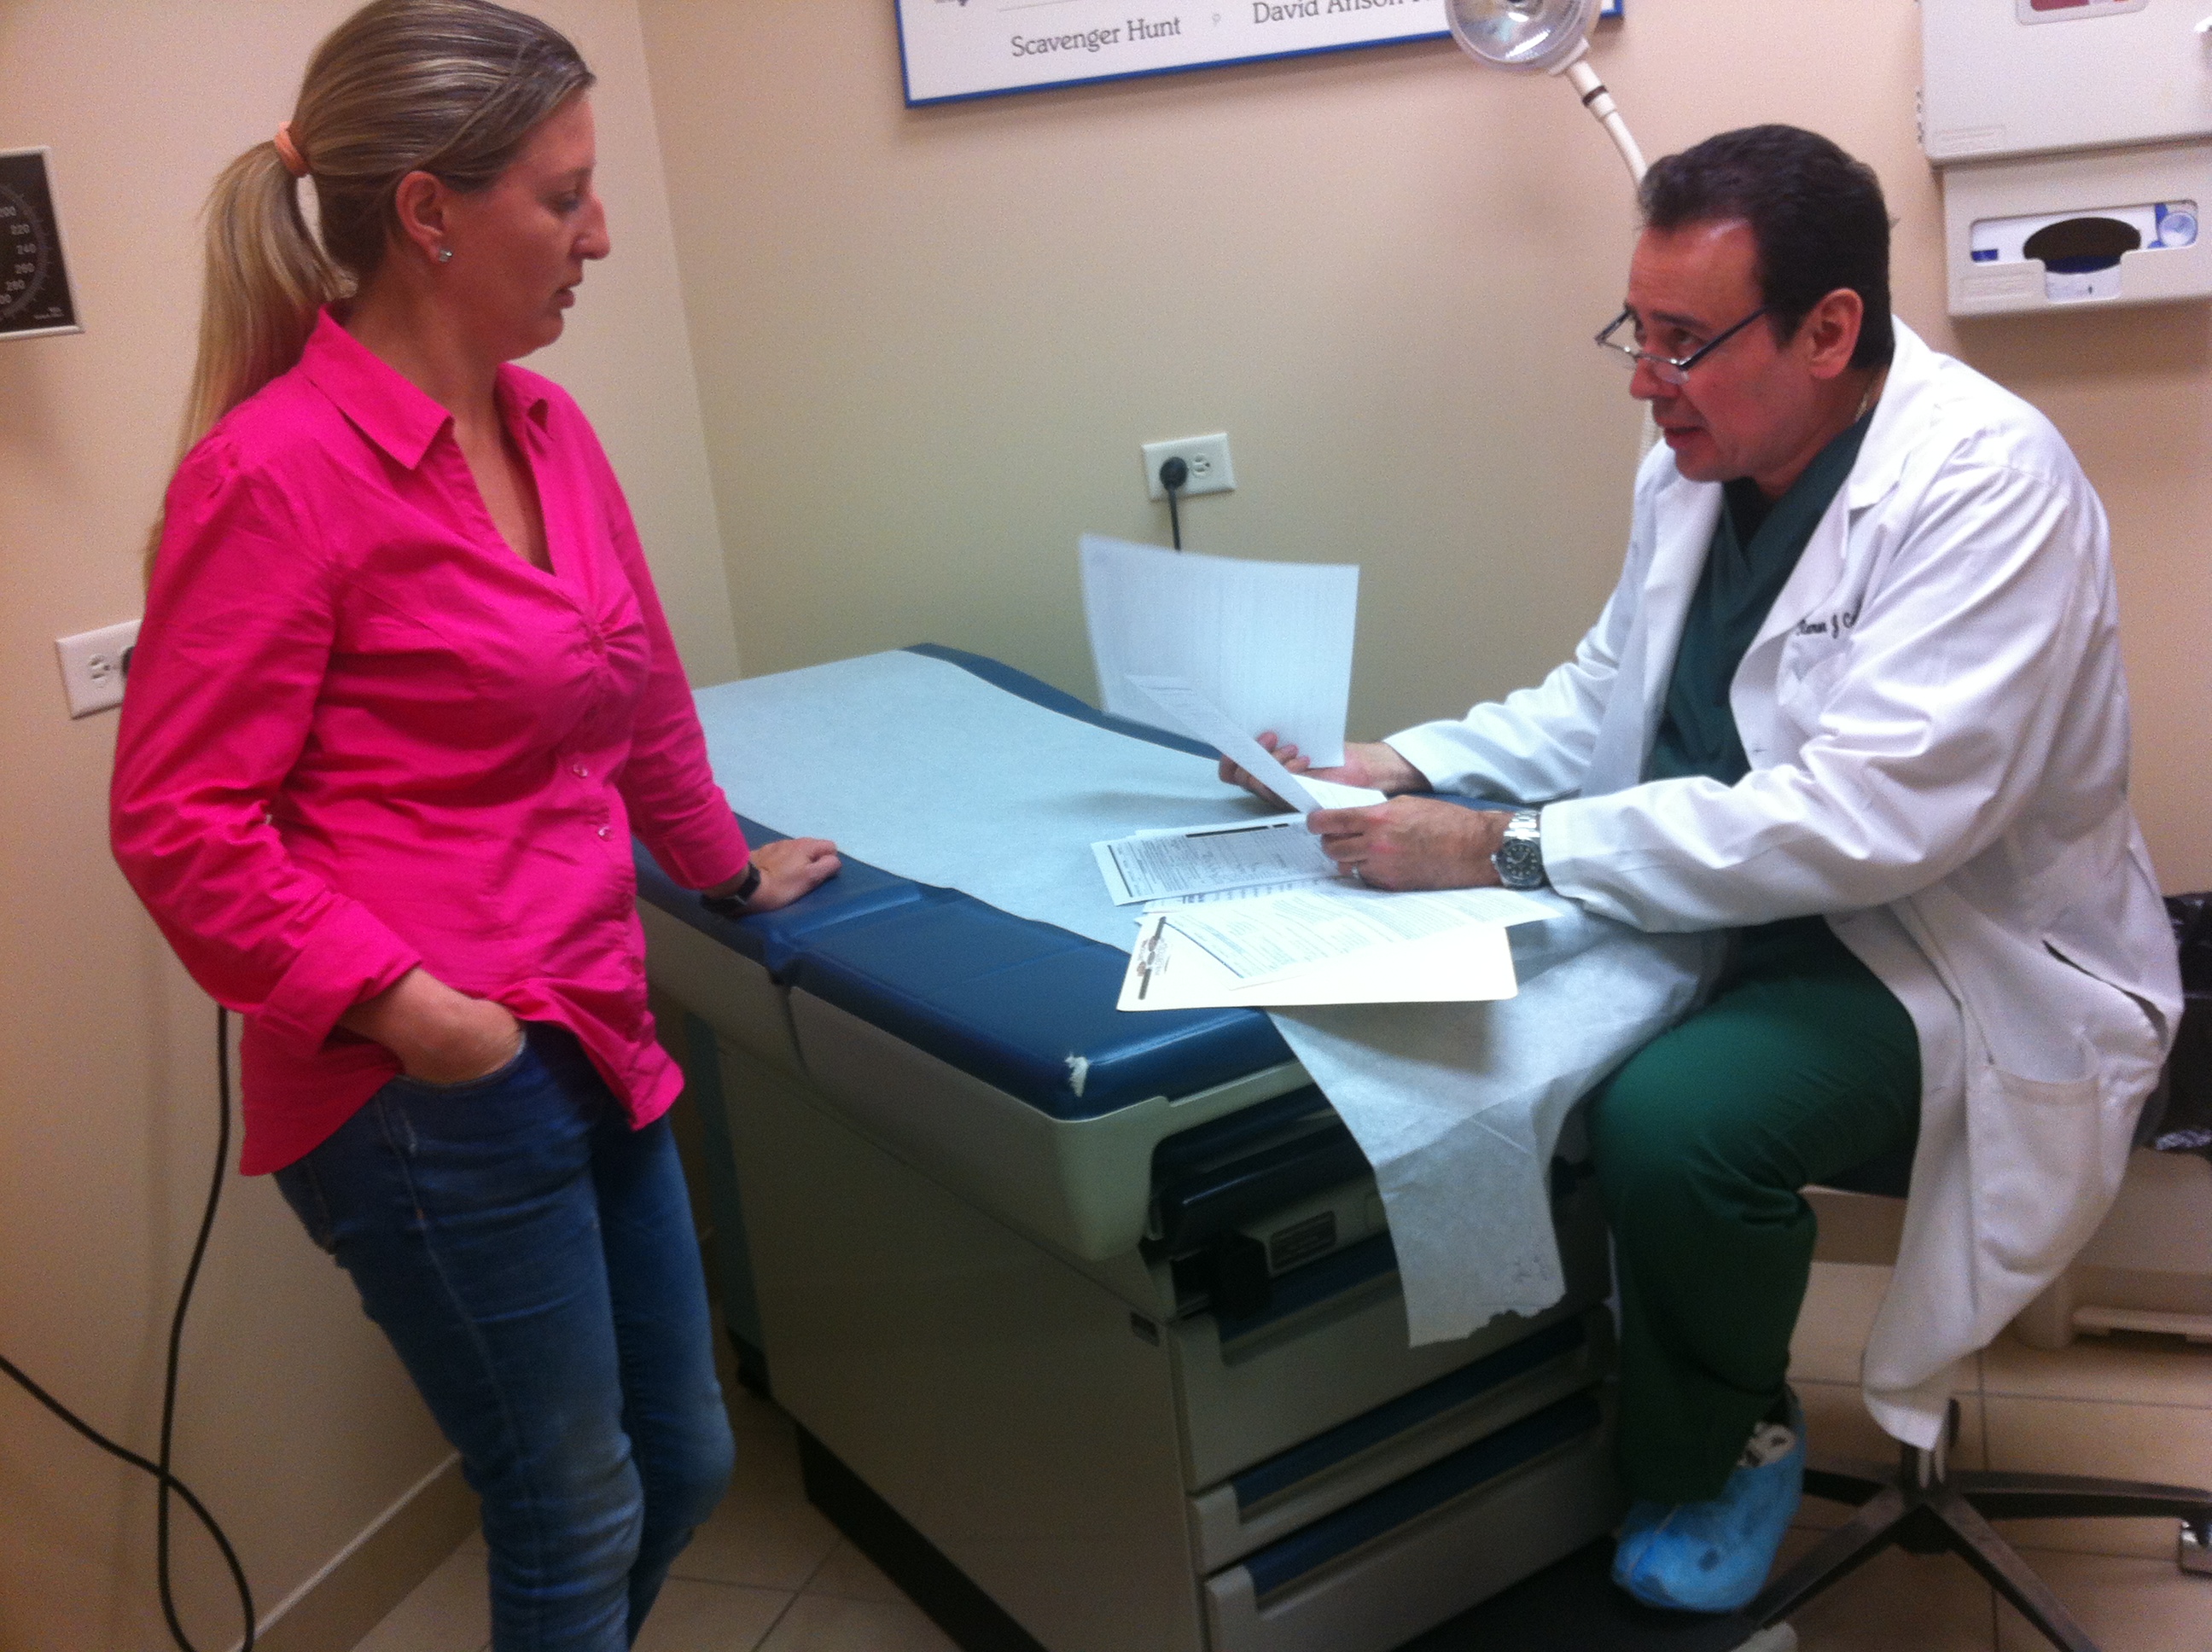 Getting The Best Varicose Vein Treatment In Chicago For Your Vein Disease On A Tight Budget